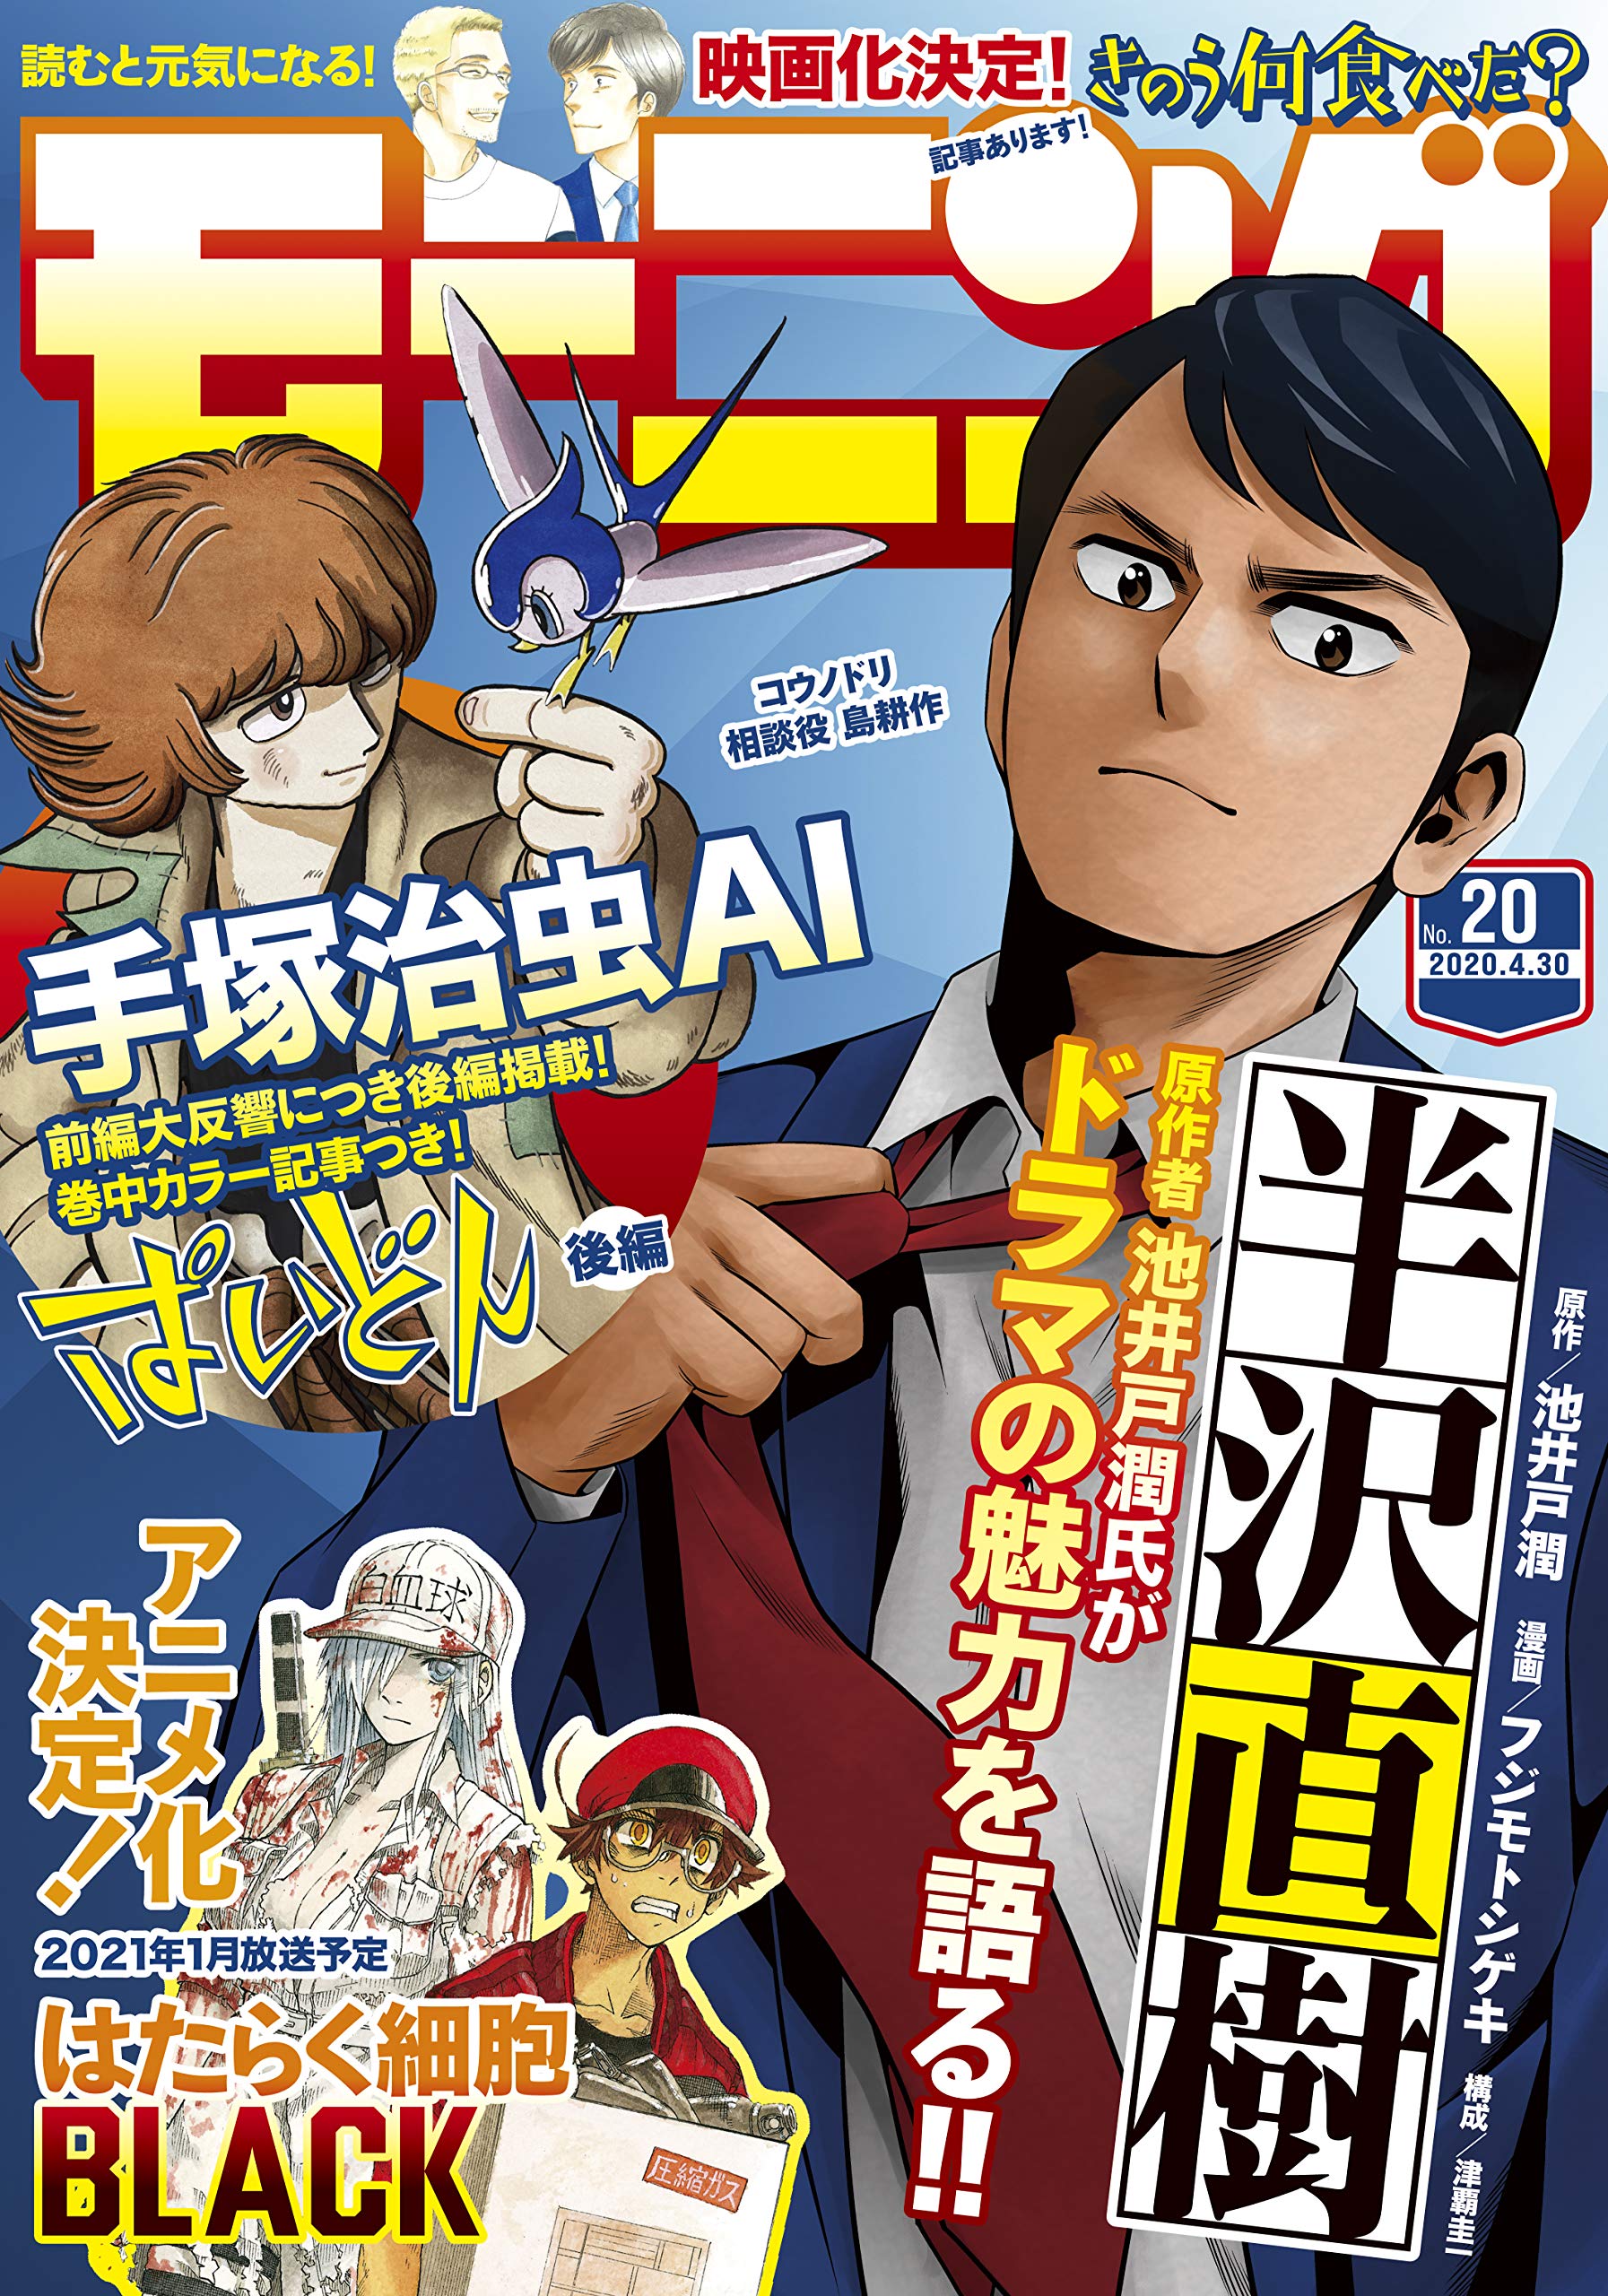 Kodansha's Morning Magazine issue cover 20 announcing that the Cells at Work! Code Black anime